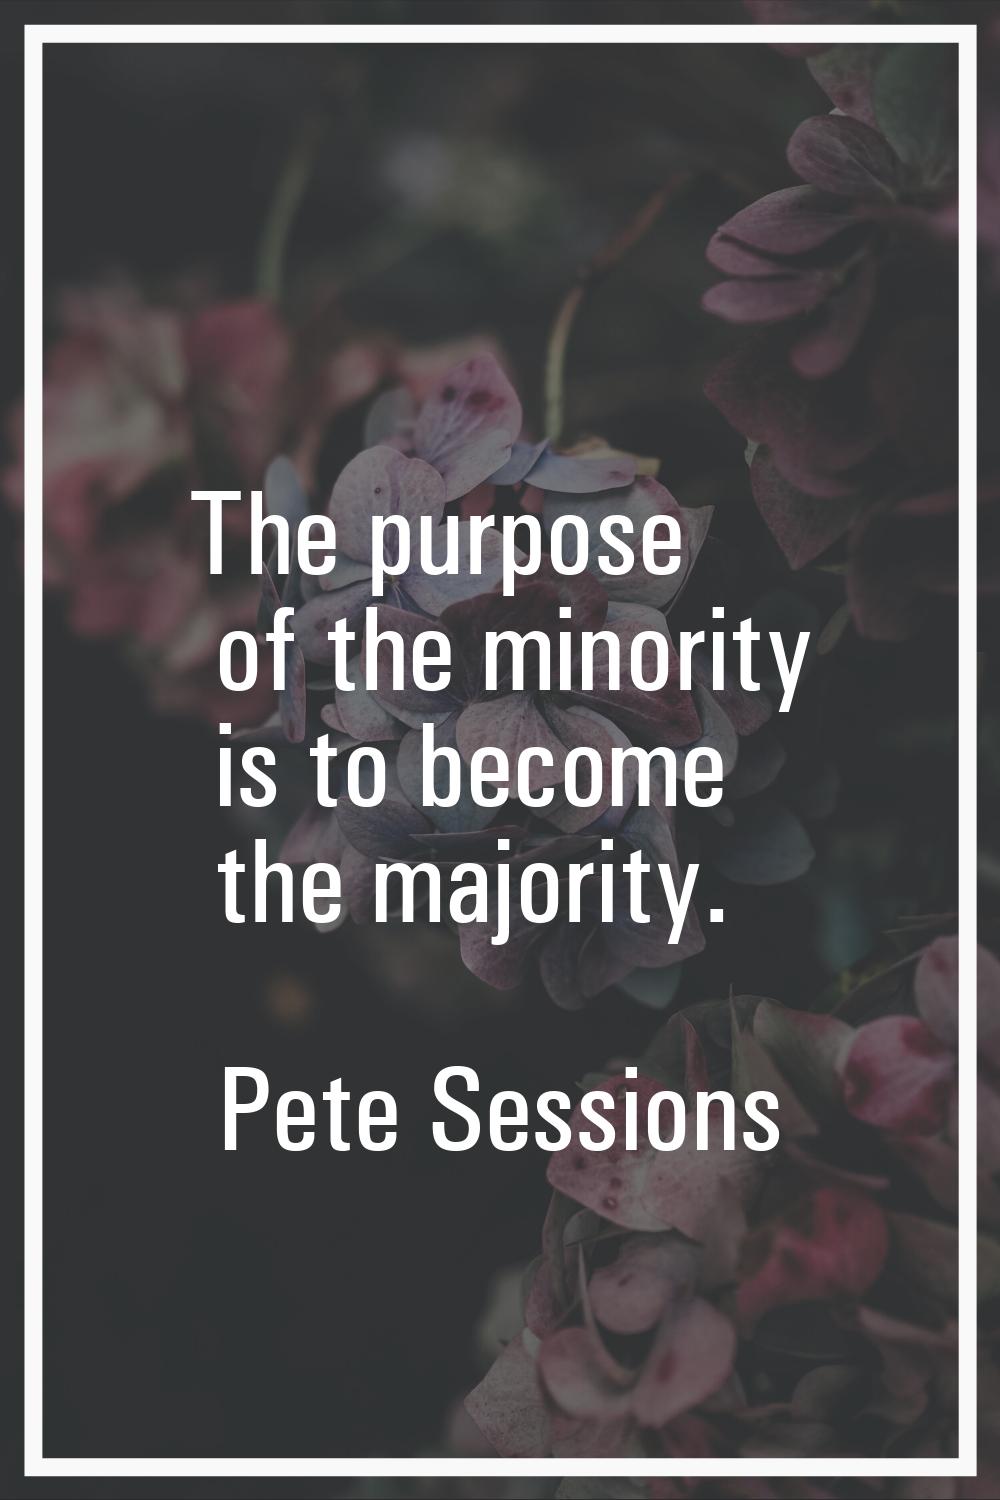 The purpose of the minority is to become the majority.